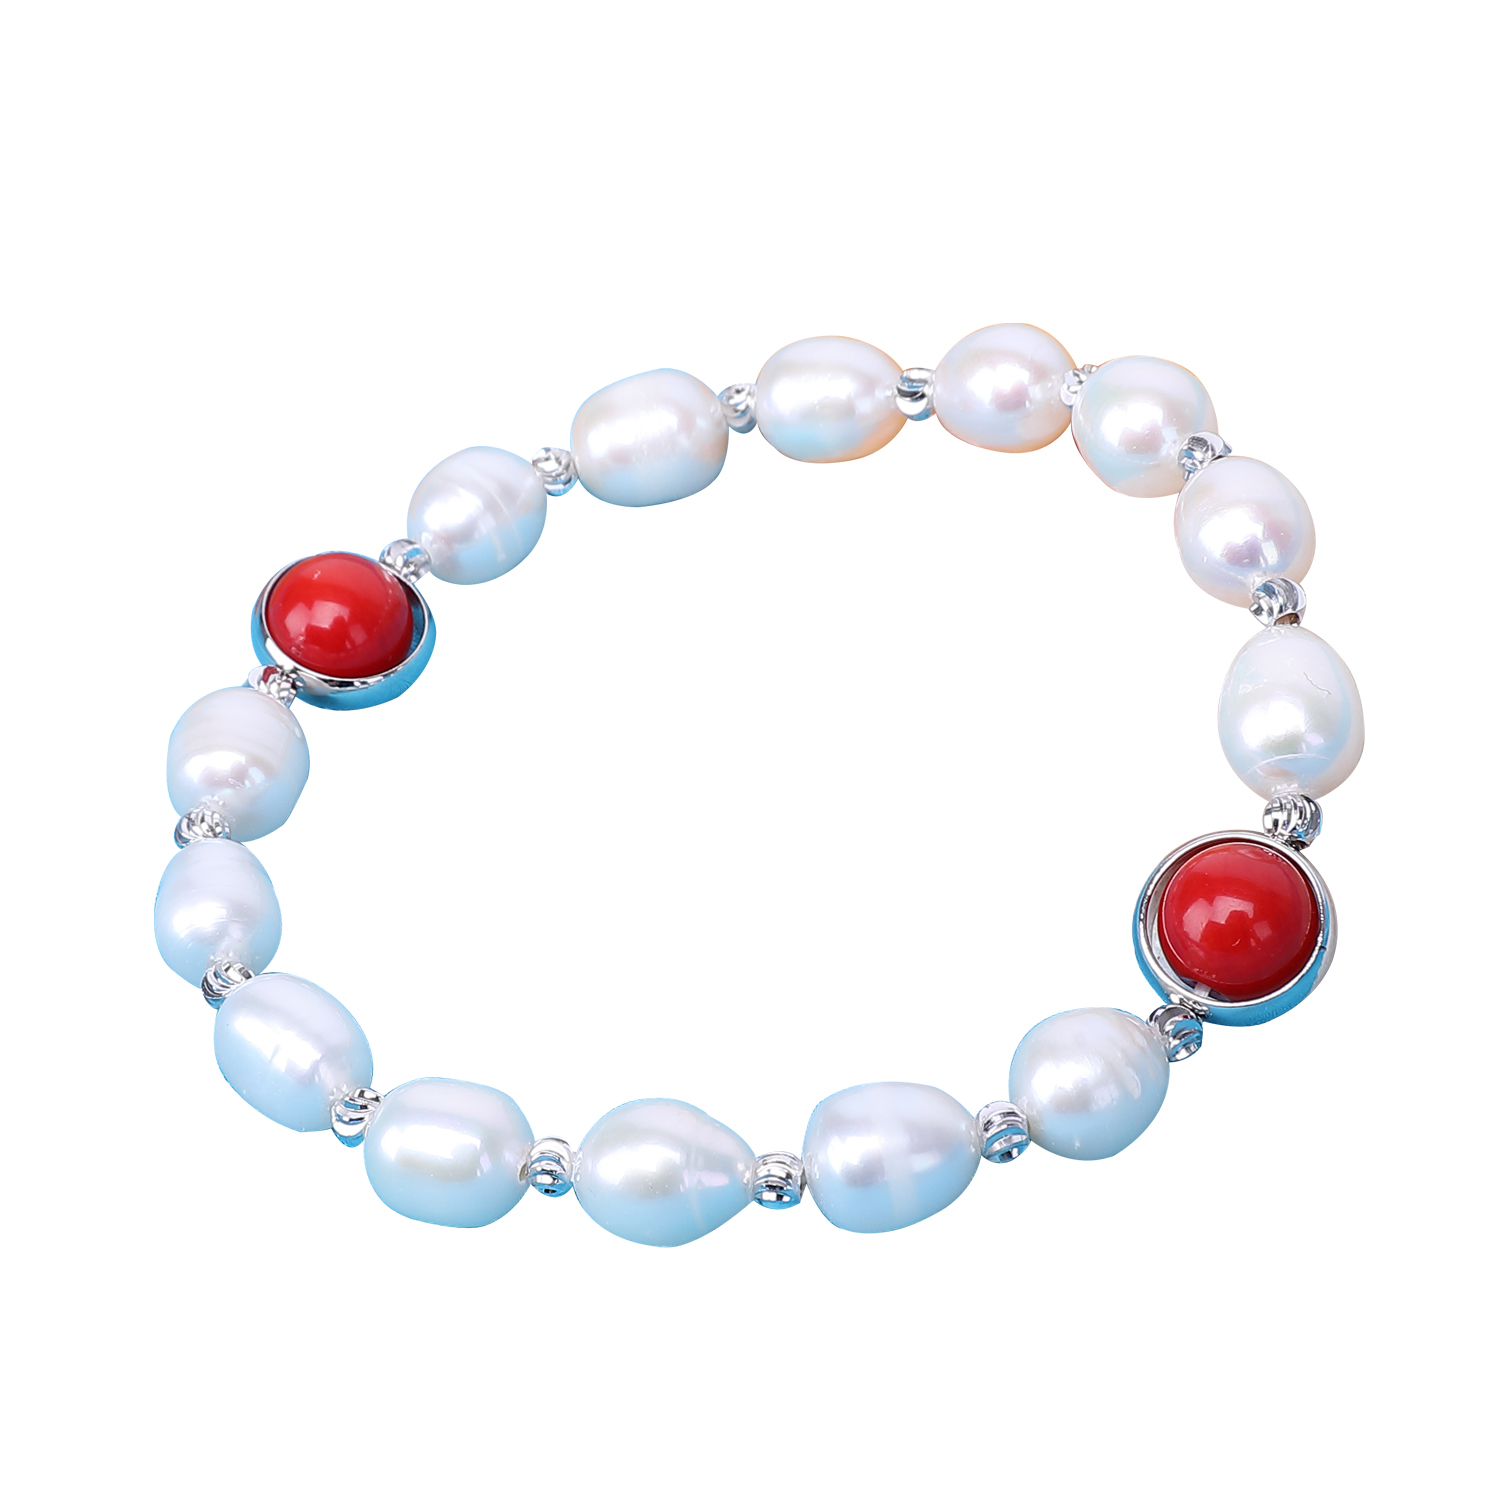 7inch Pearl Bracelet With Red Coral